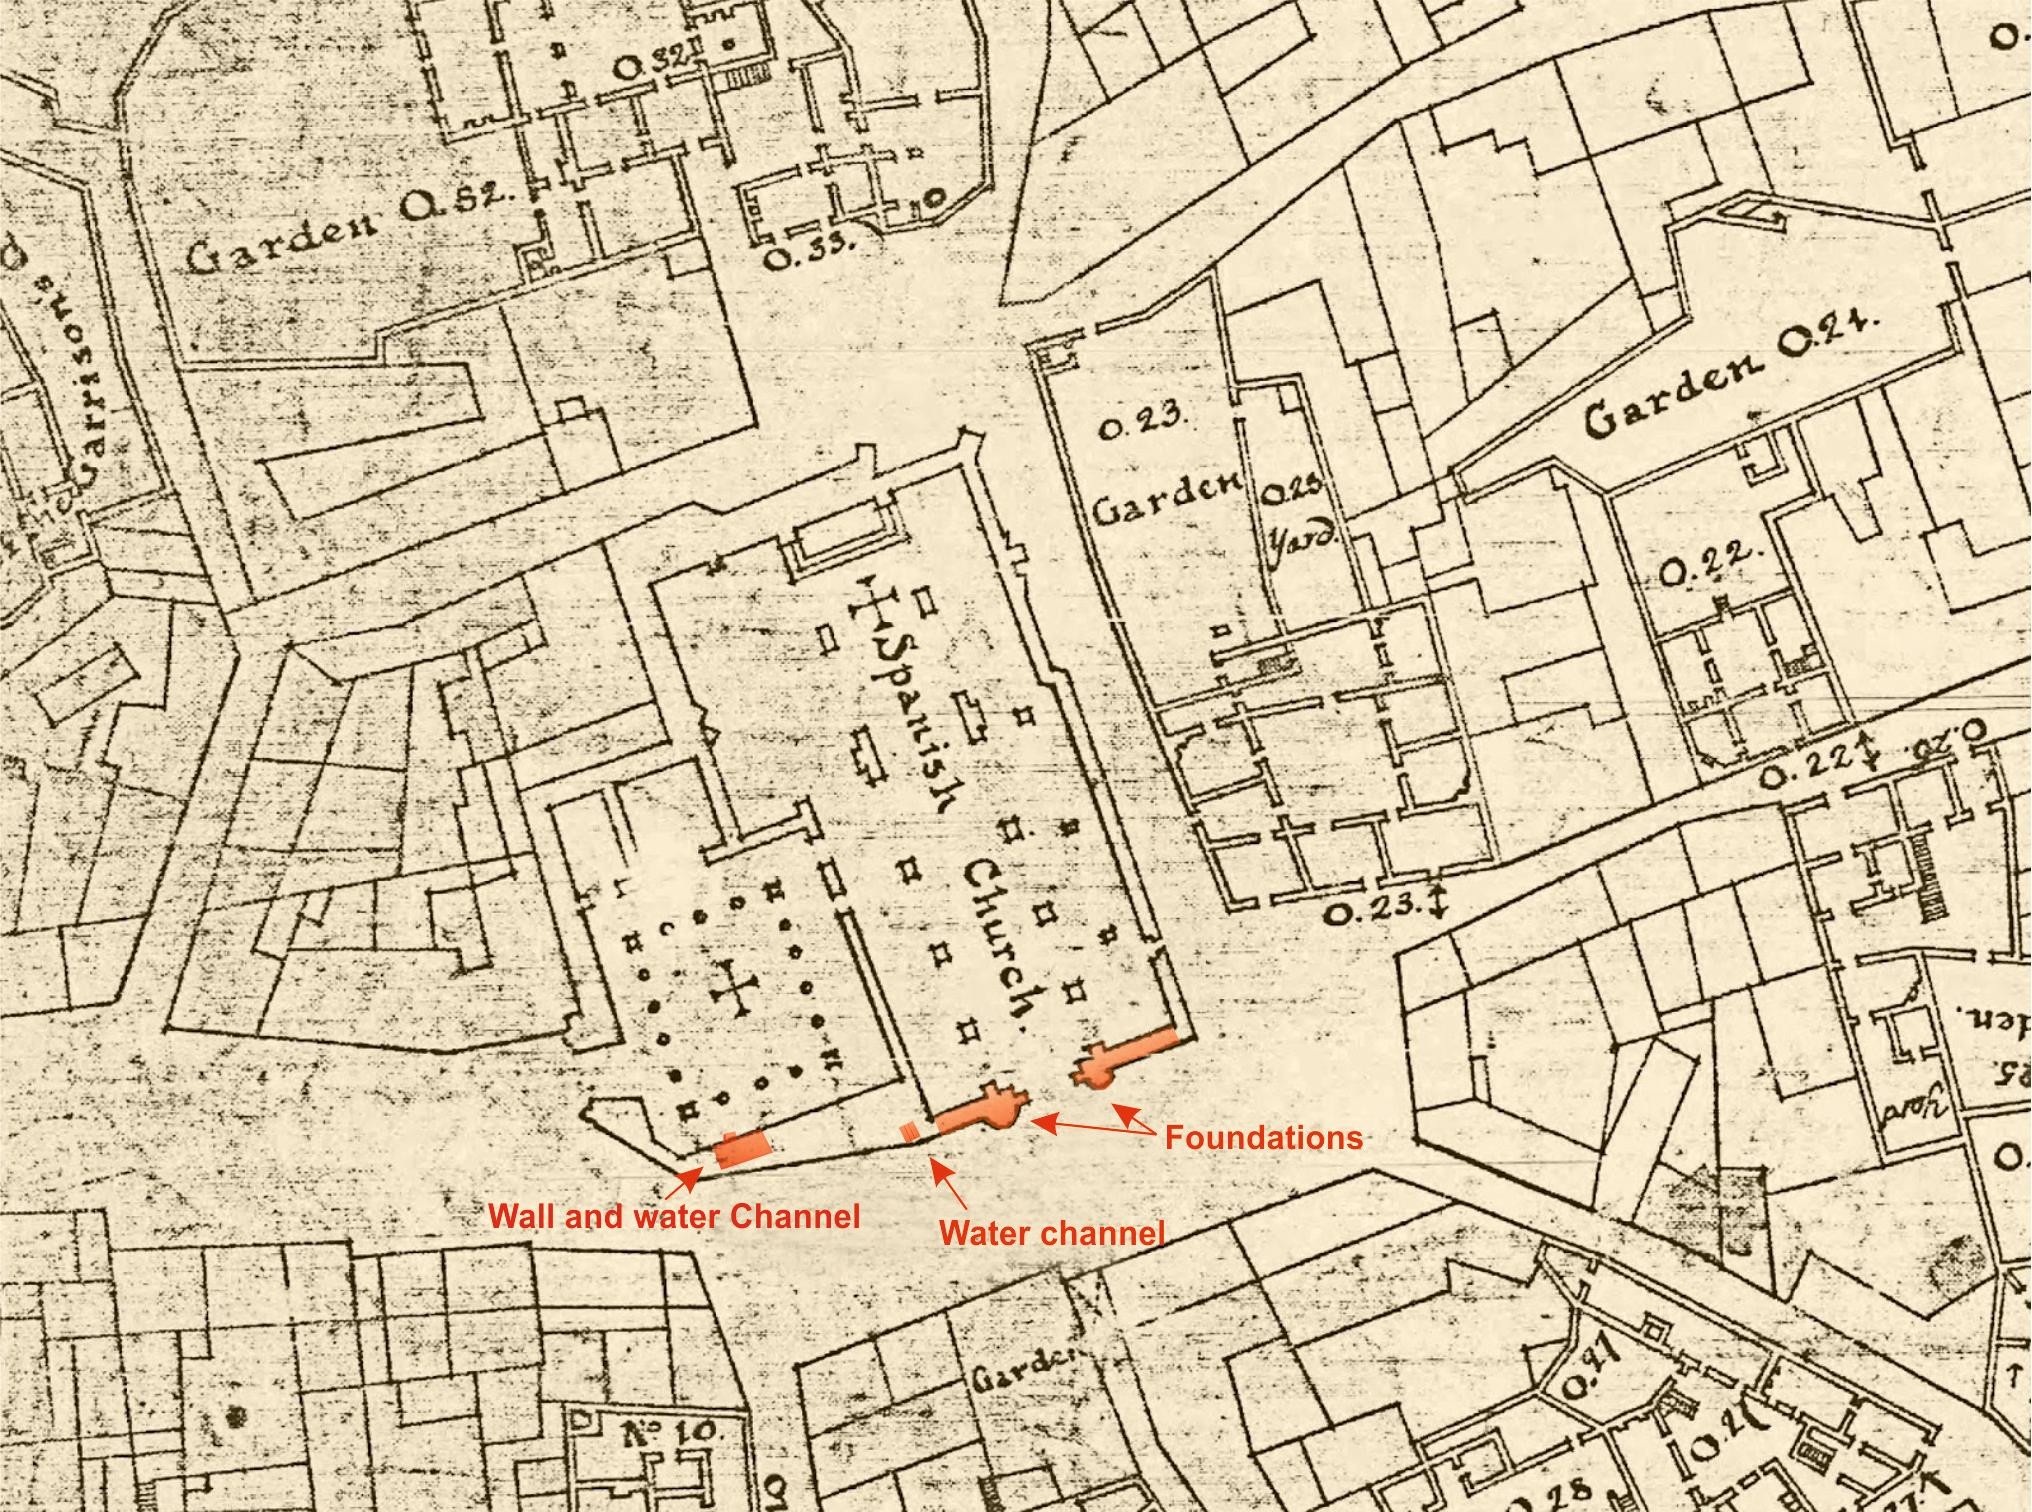 Location of the excavated structures on the 1750 plan by Chief Military Engineer James Gabriel Montressor.